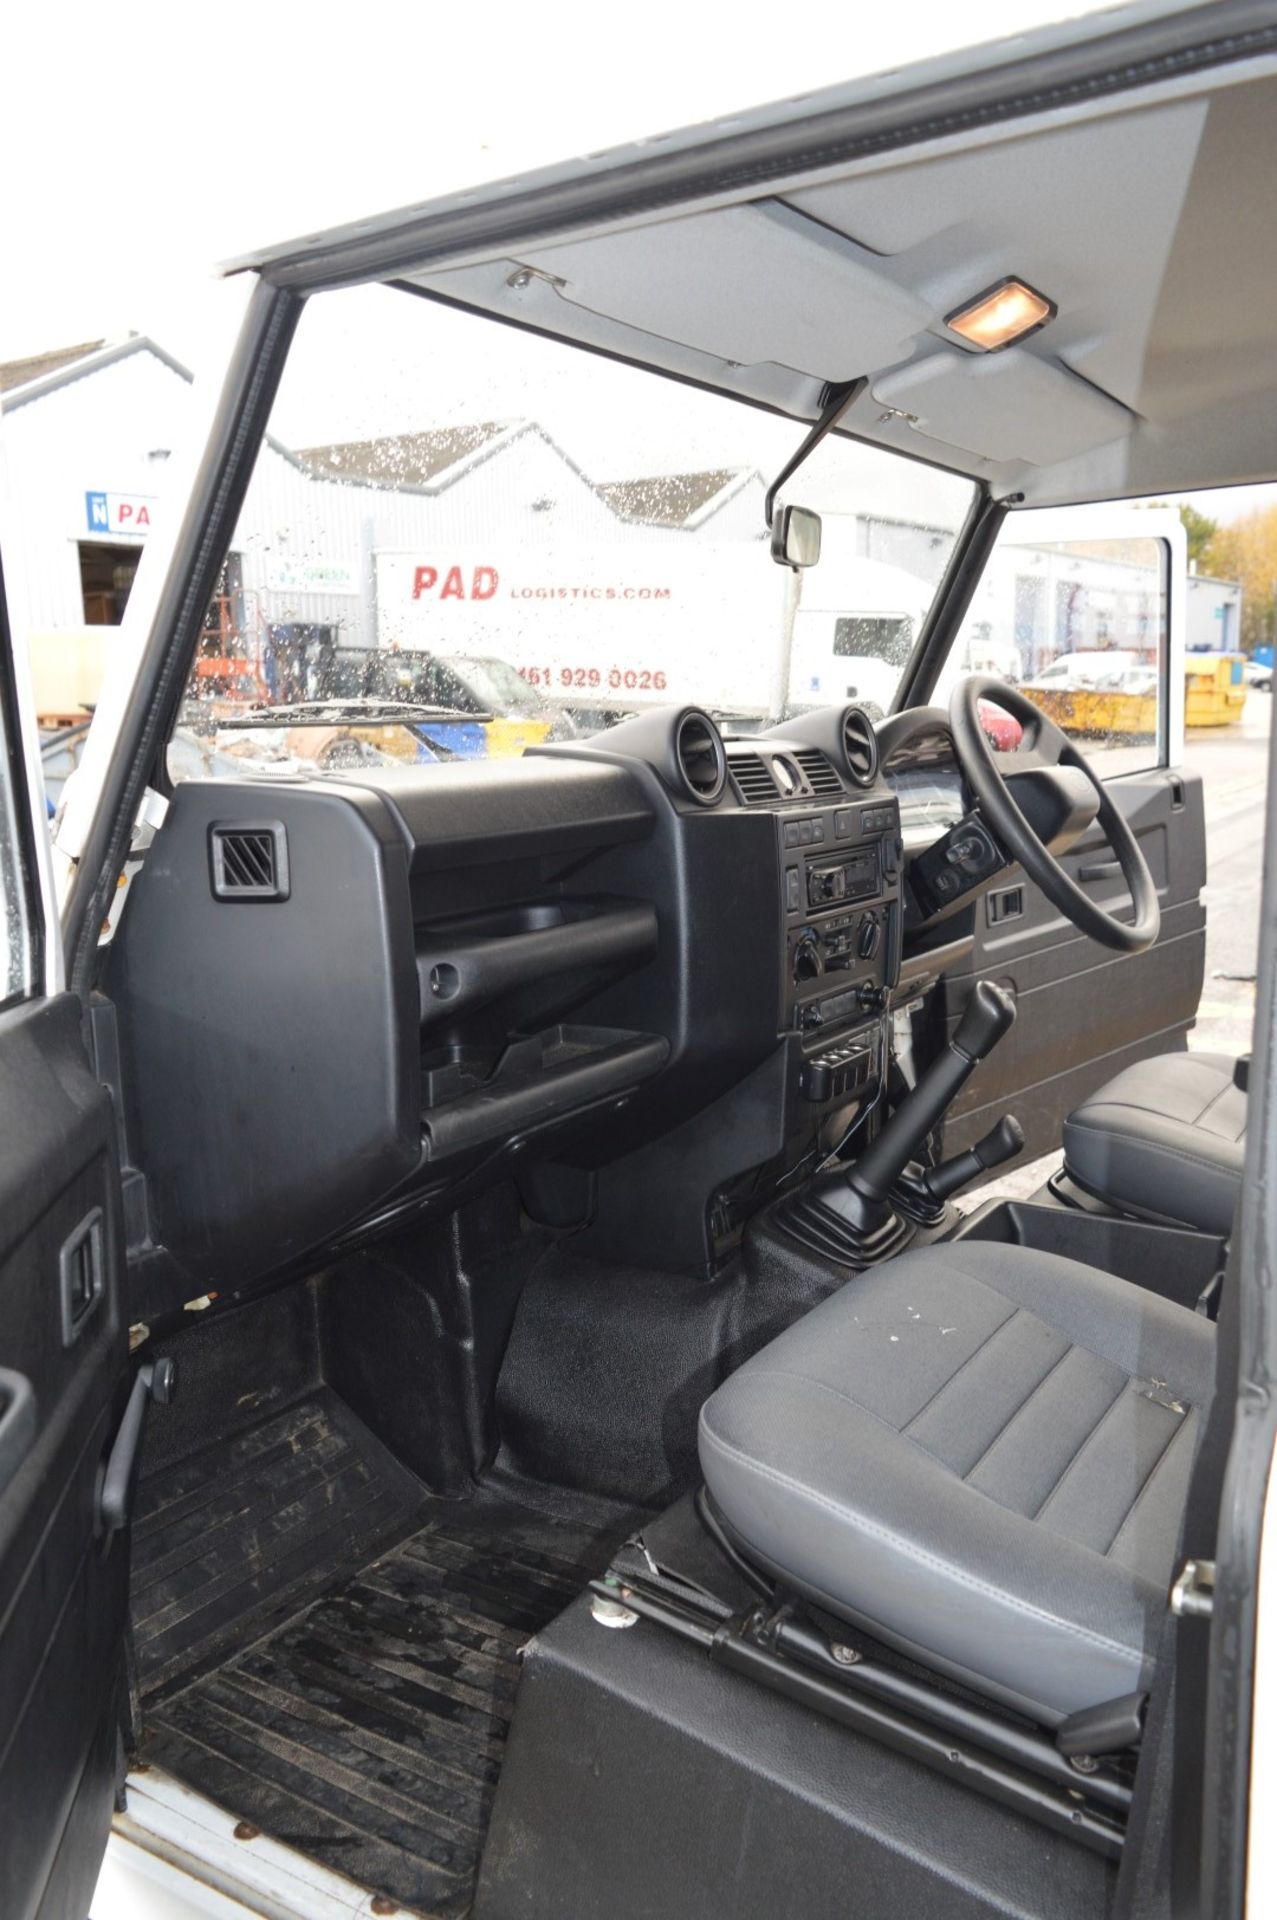 1 x Land Rover Defender 110 4x4 Off Road Vehicle - Year 2010 - MOT Expiry July 2016 - Millage 90,000 - Image 14 of 34